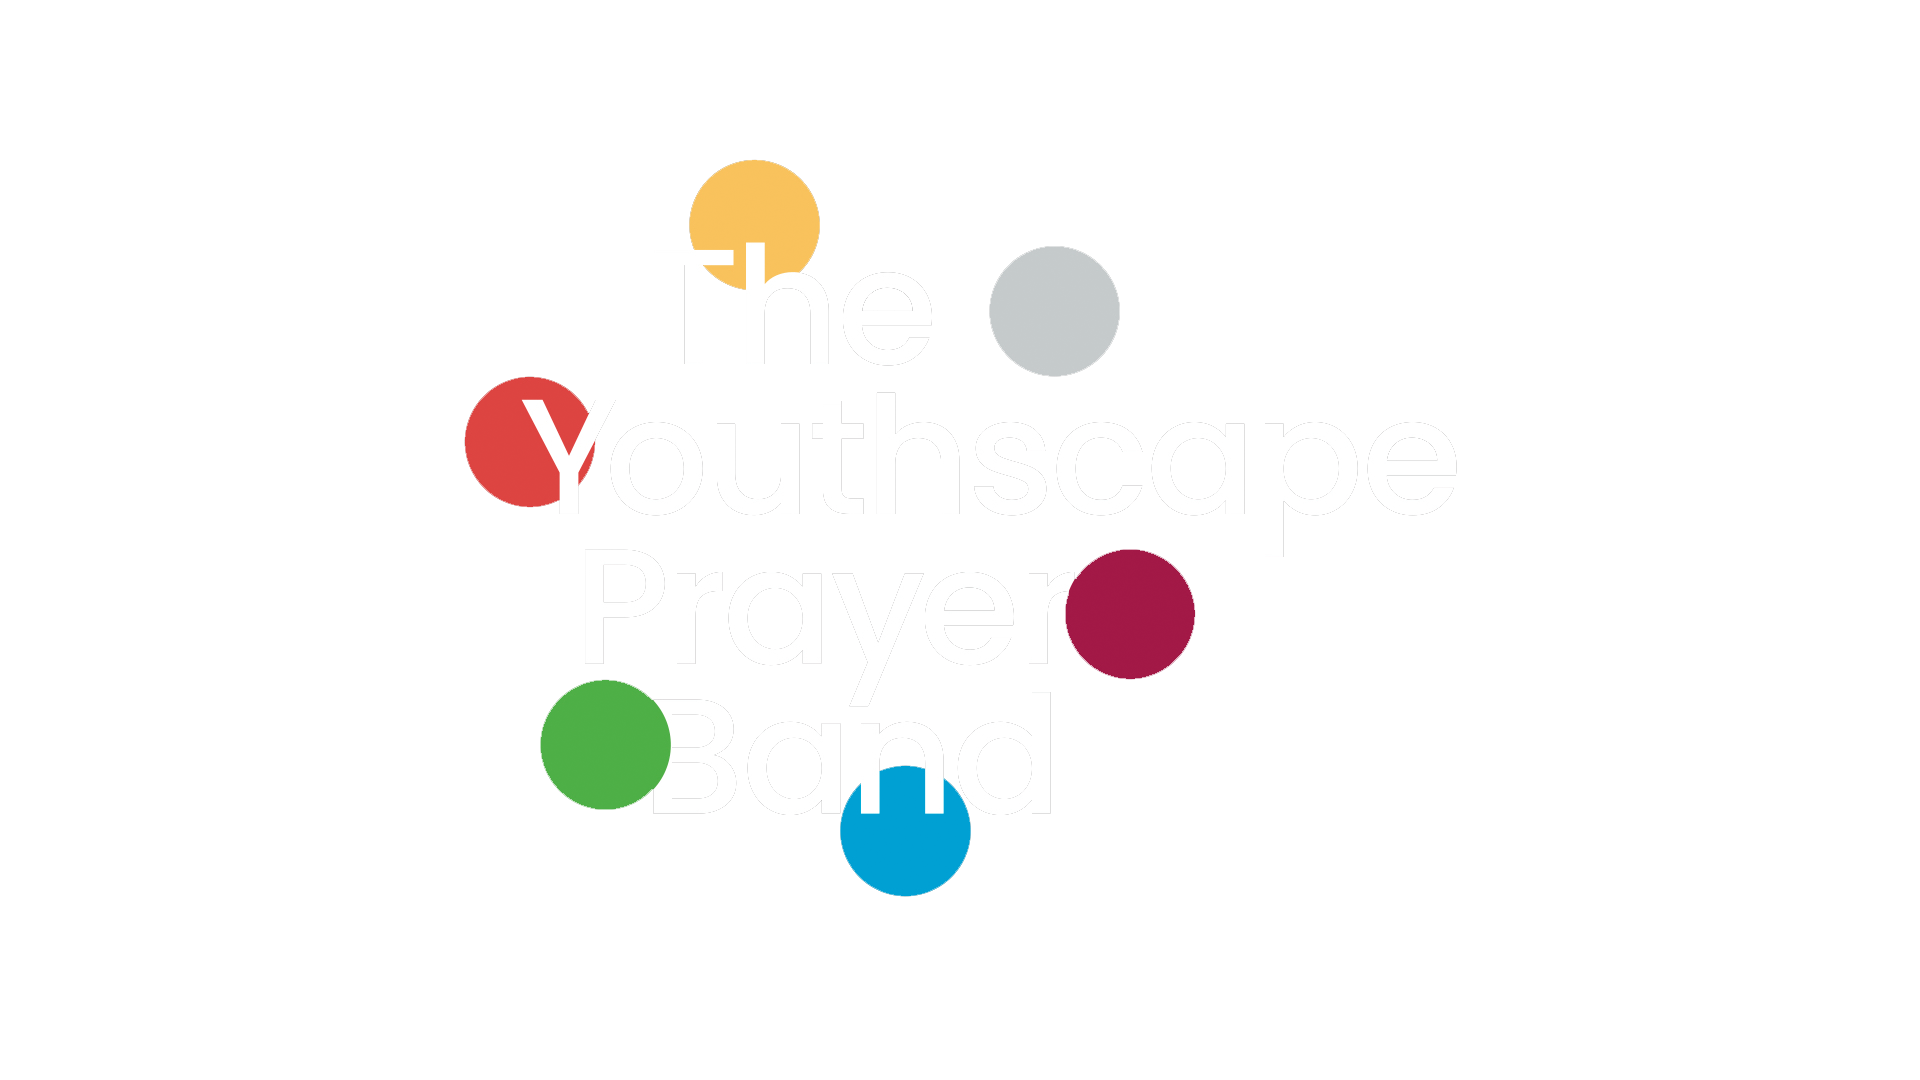 The youthscape prayer band logo